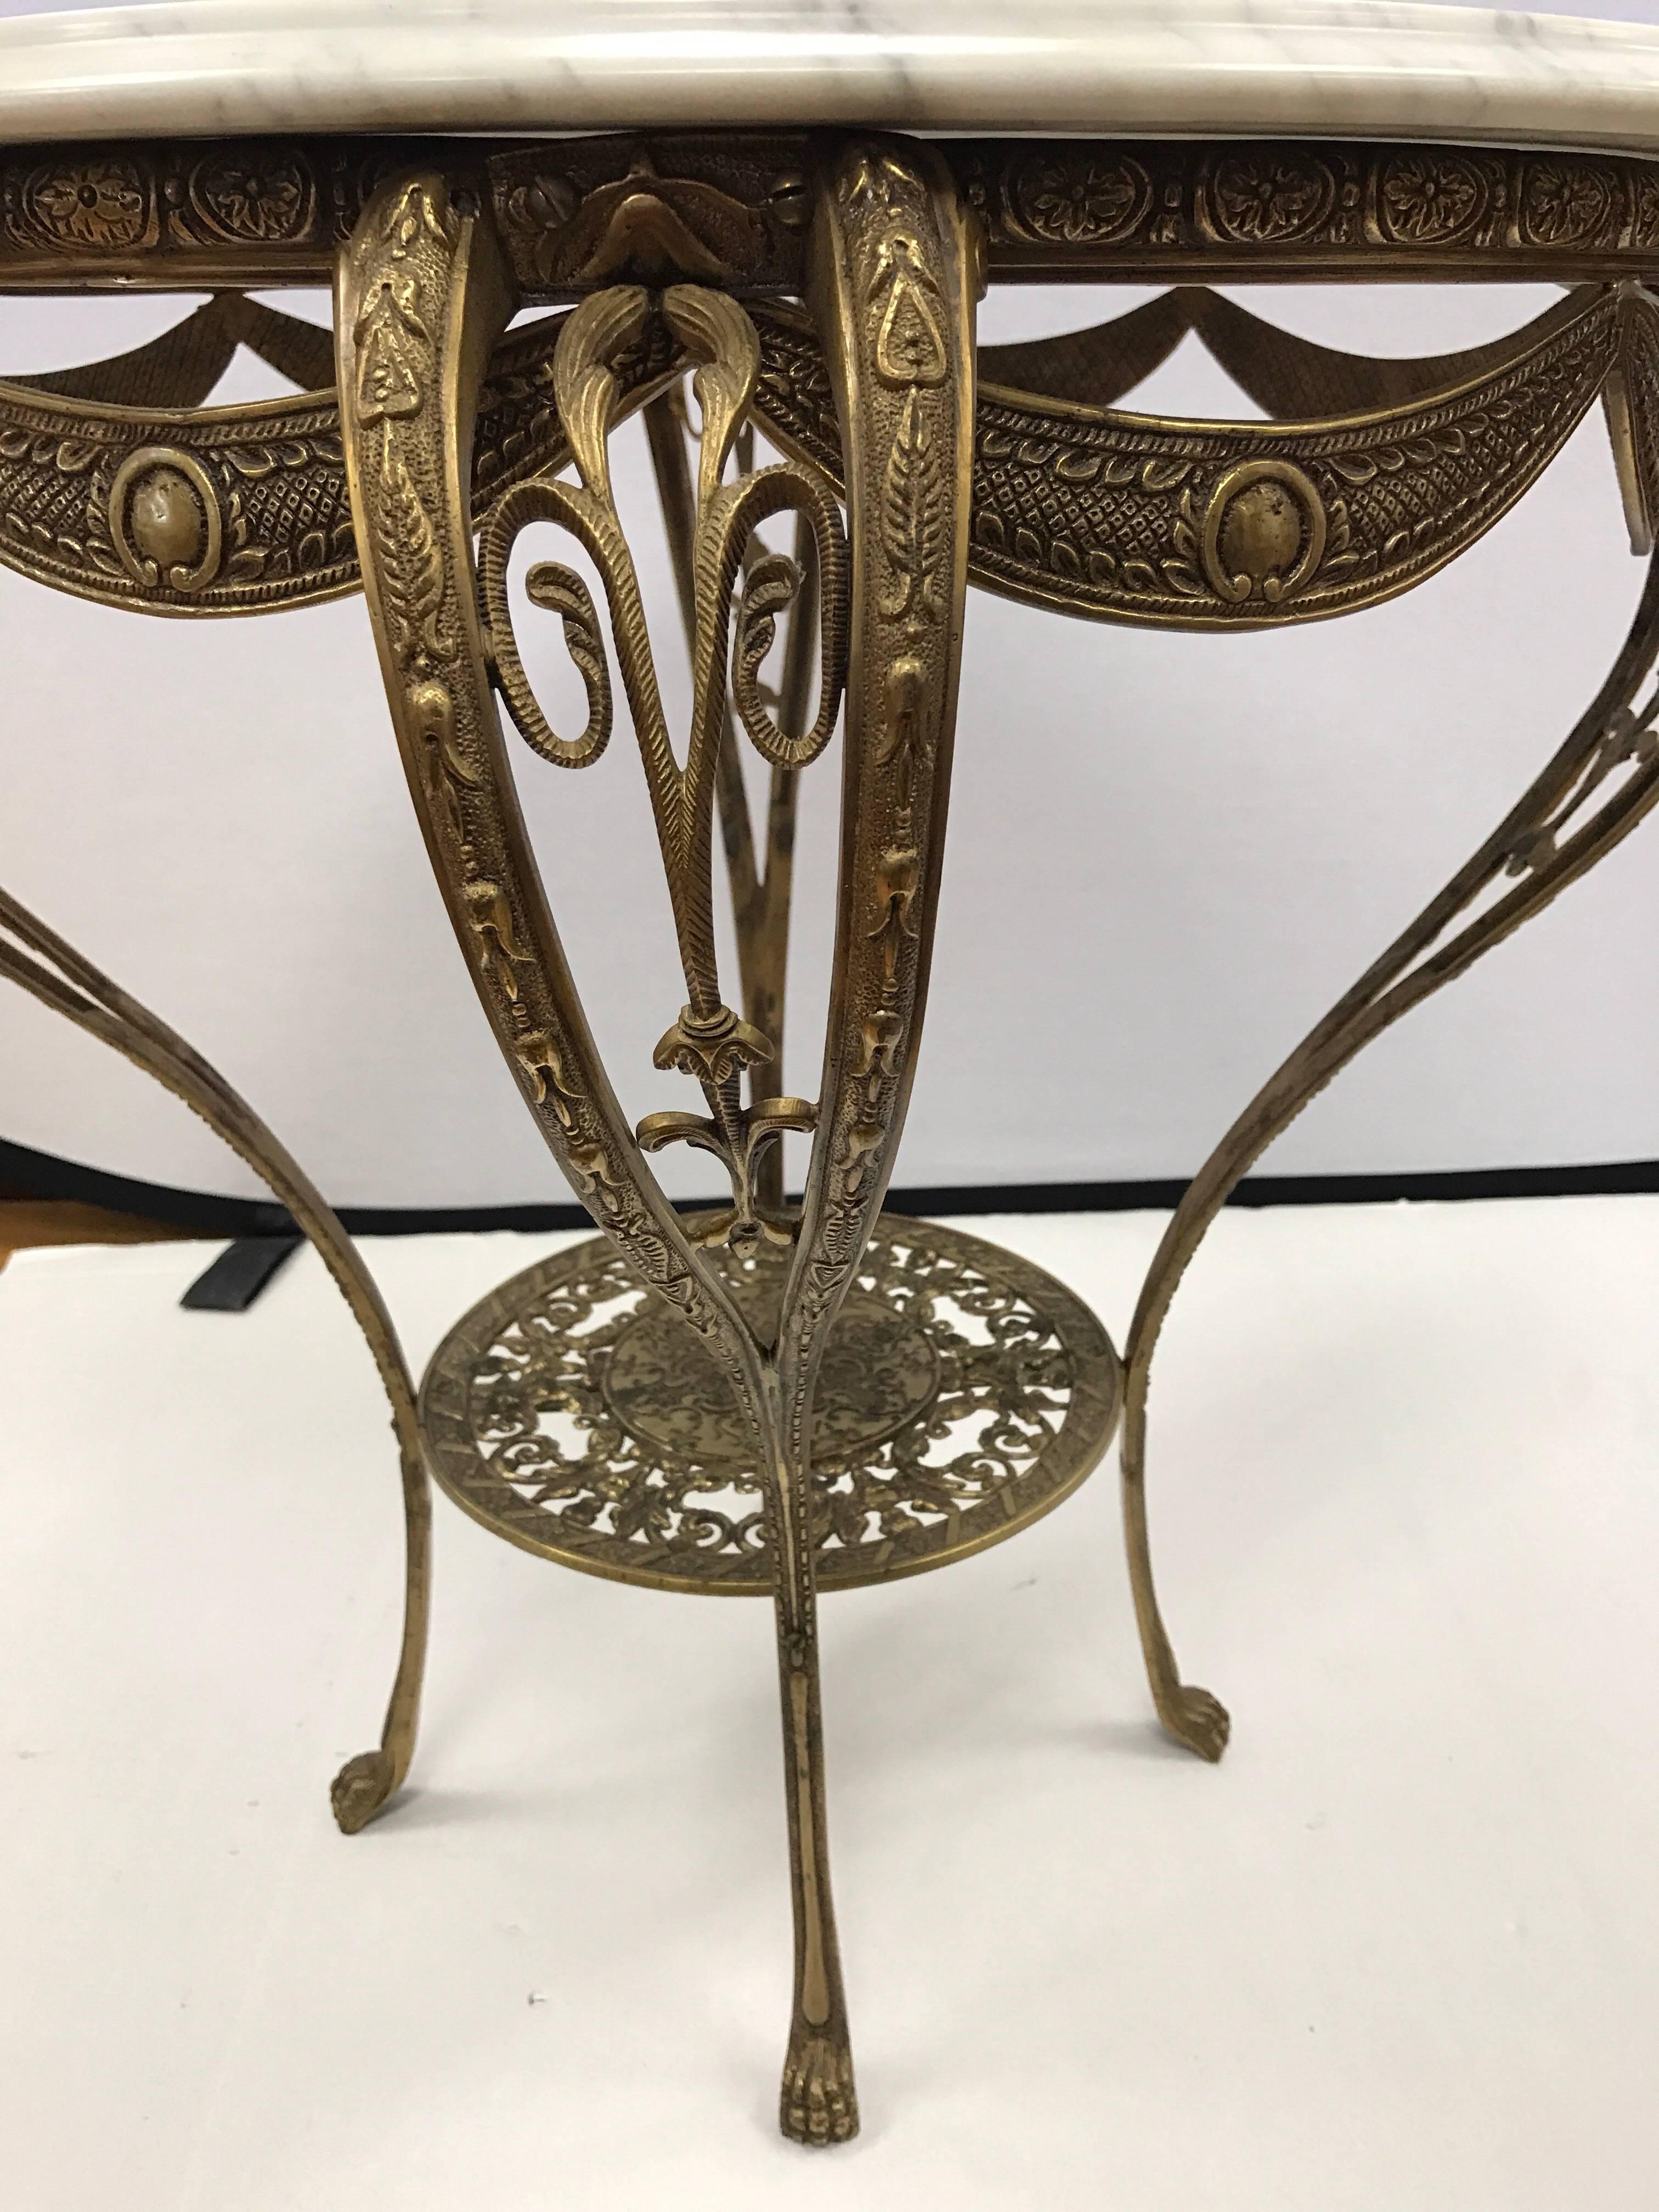 Elegant brass and marble round table made in Italy.  The terrific scale of this piece makes it a must have that can fit anywhere. The incised gold design over the marble top and elaborate brass work really set this table apart.
